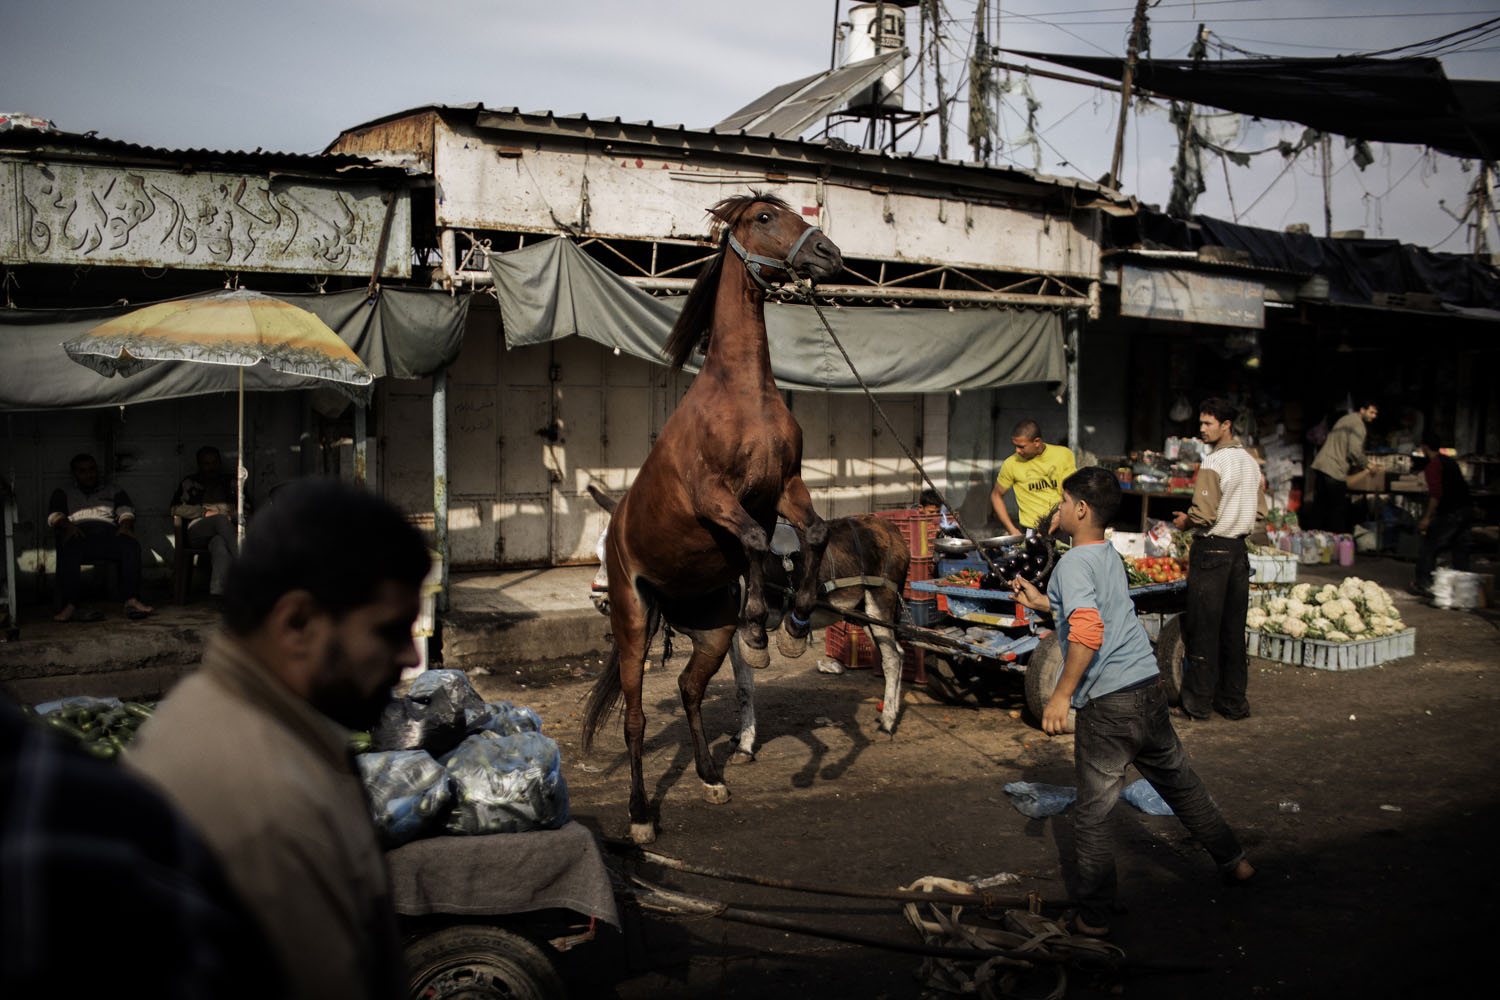 Nov. 19, 2012. A Palestinian boy tends to his horse at the central market in Gaza City.